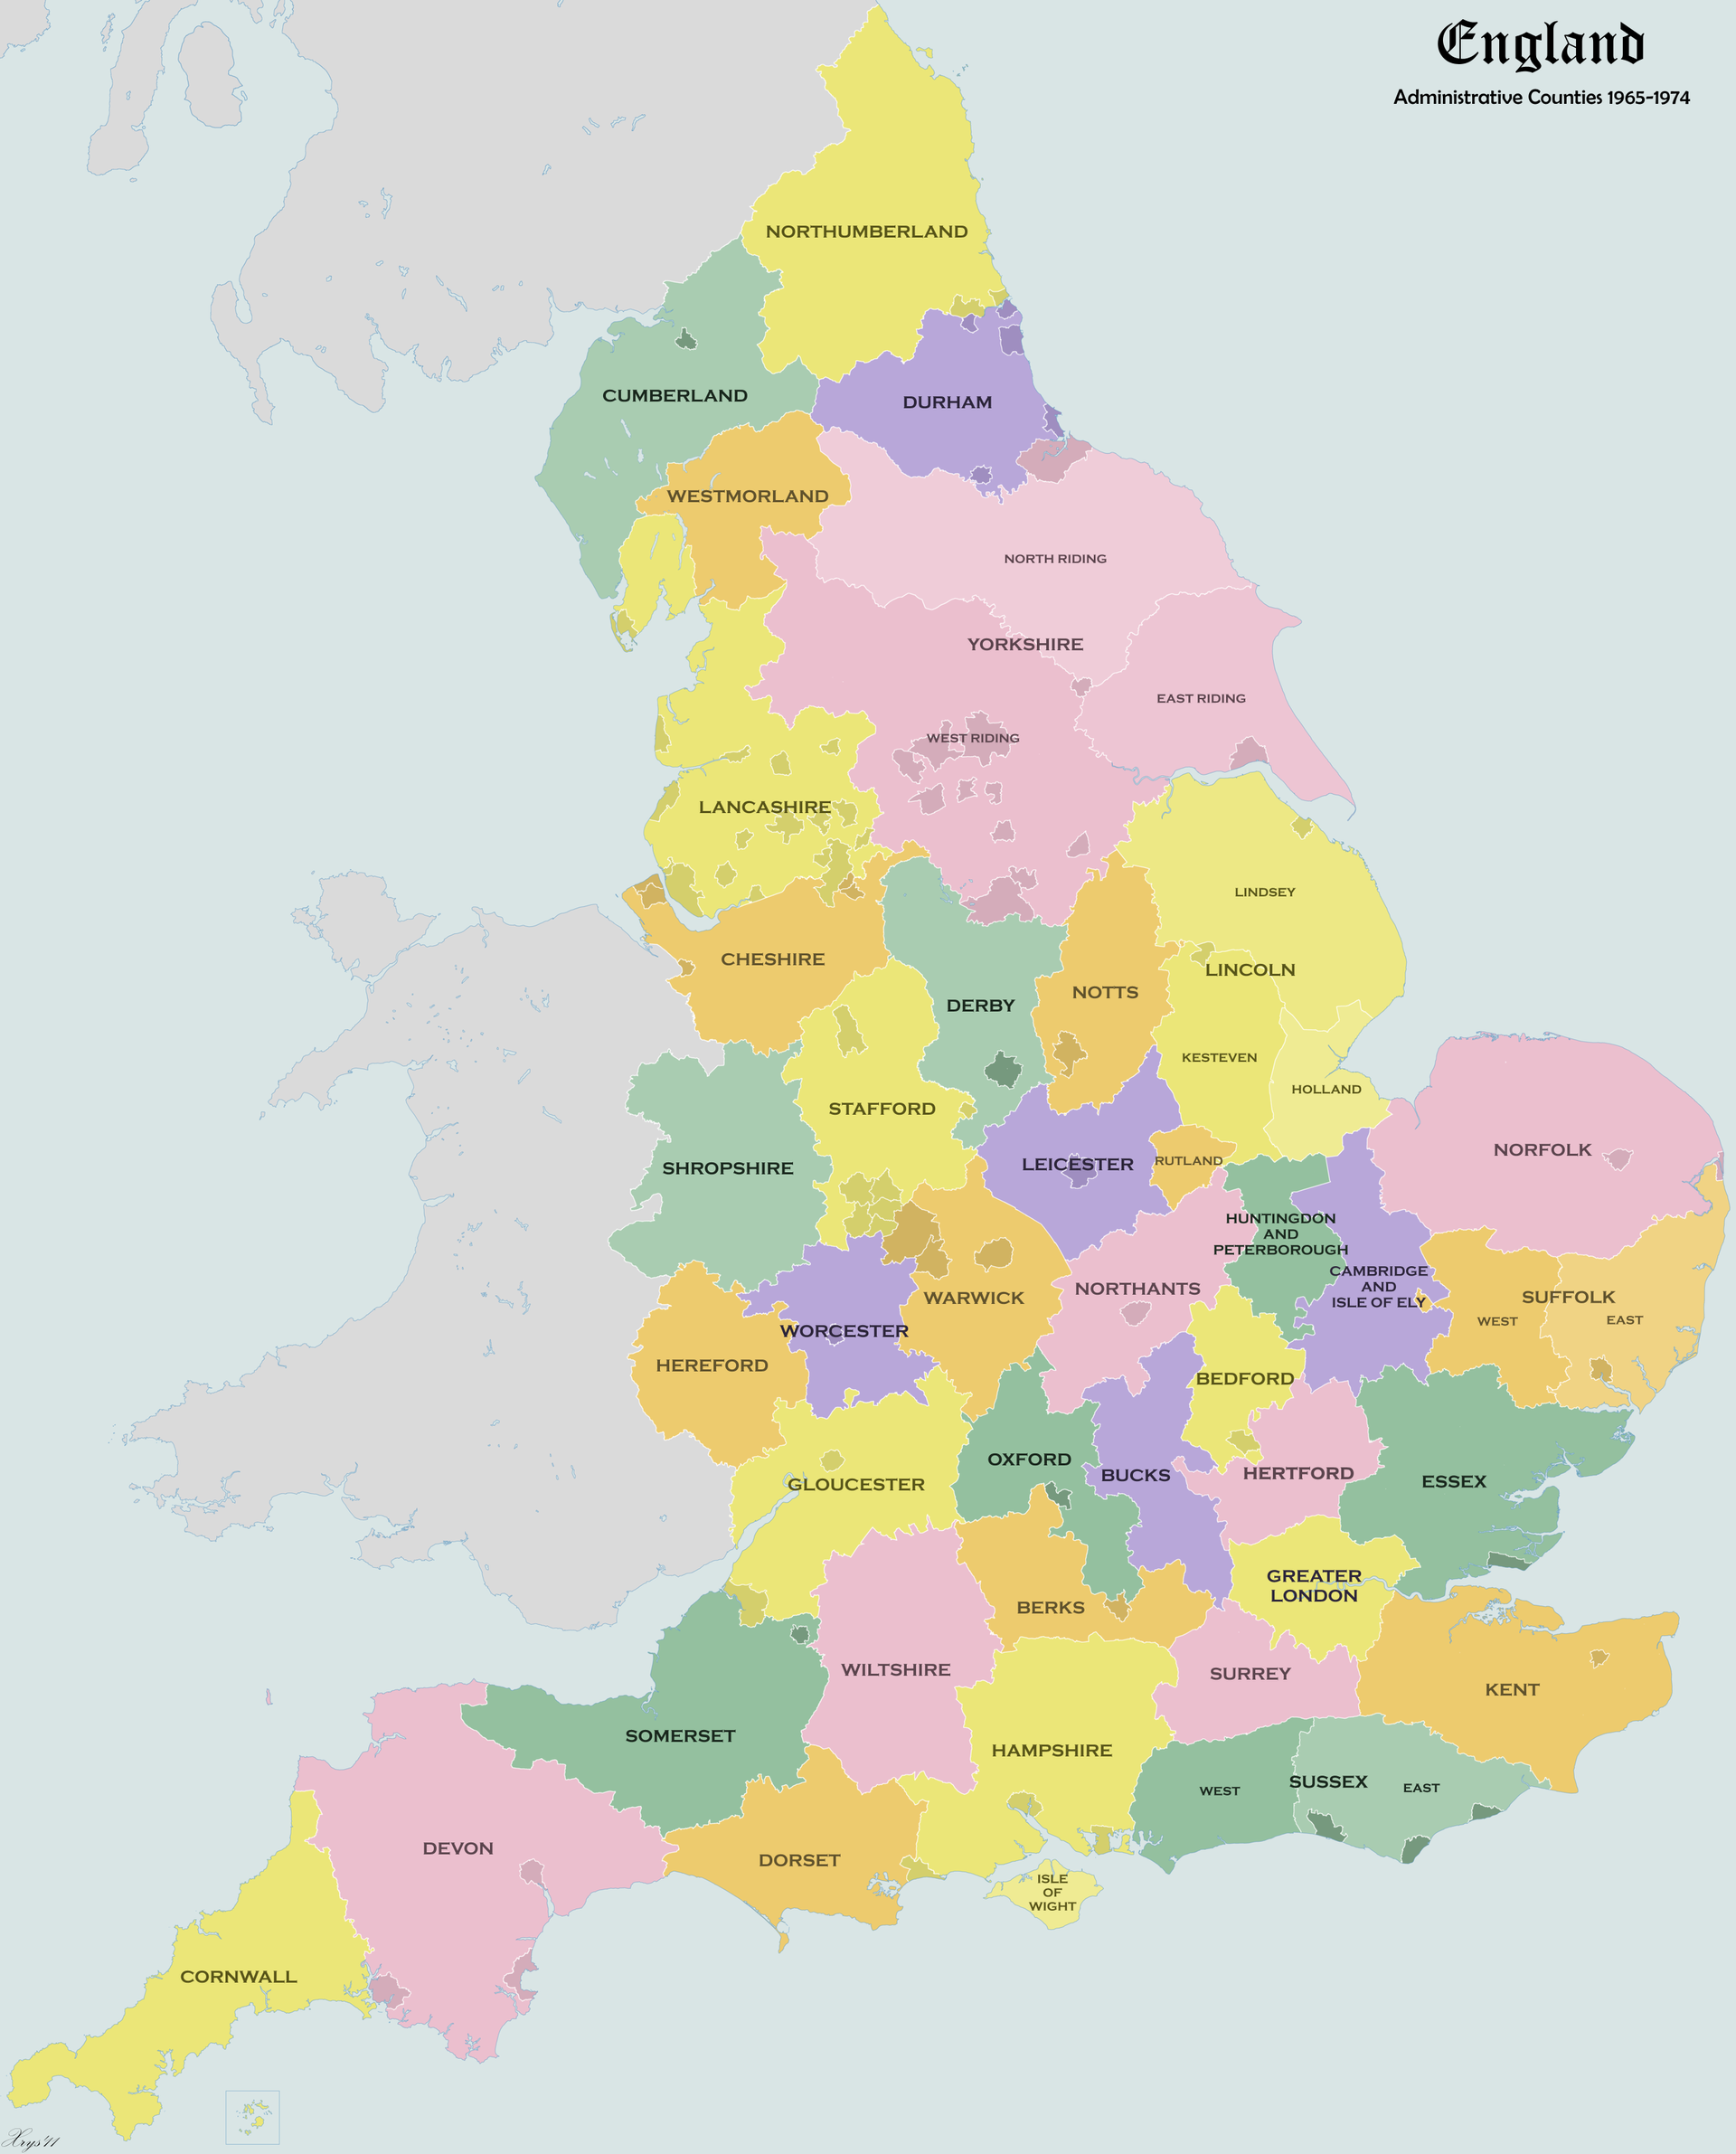 Administrative counties of England - Wikipedia